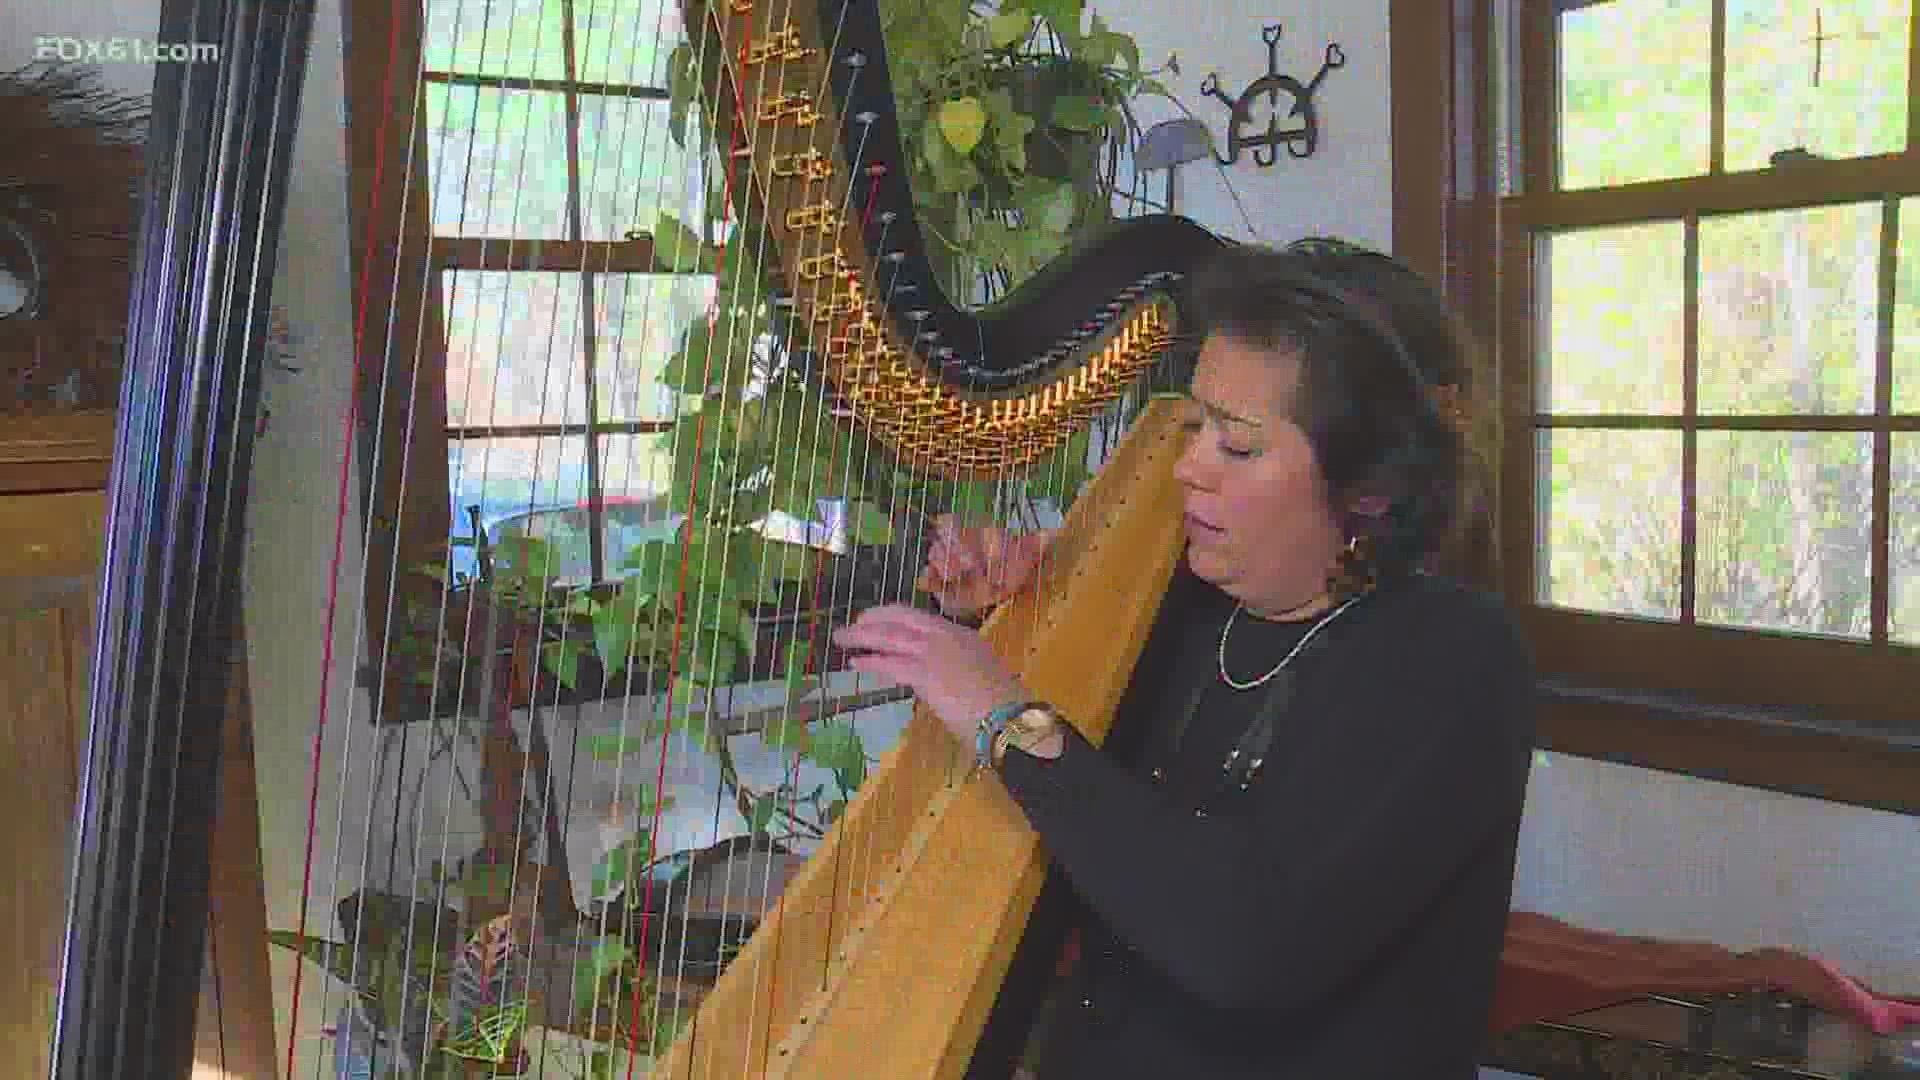 Grace Cloutier is a classically trained concert harpist who has traveled the world performing on stages from Carnegie Hall to the White House.